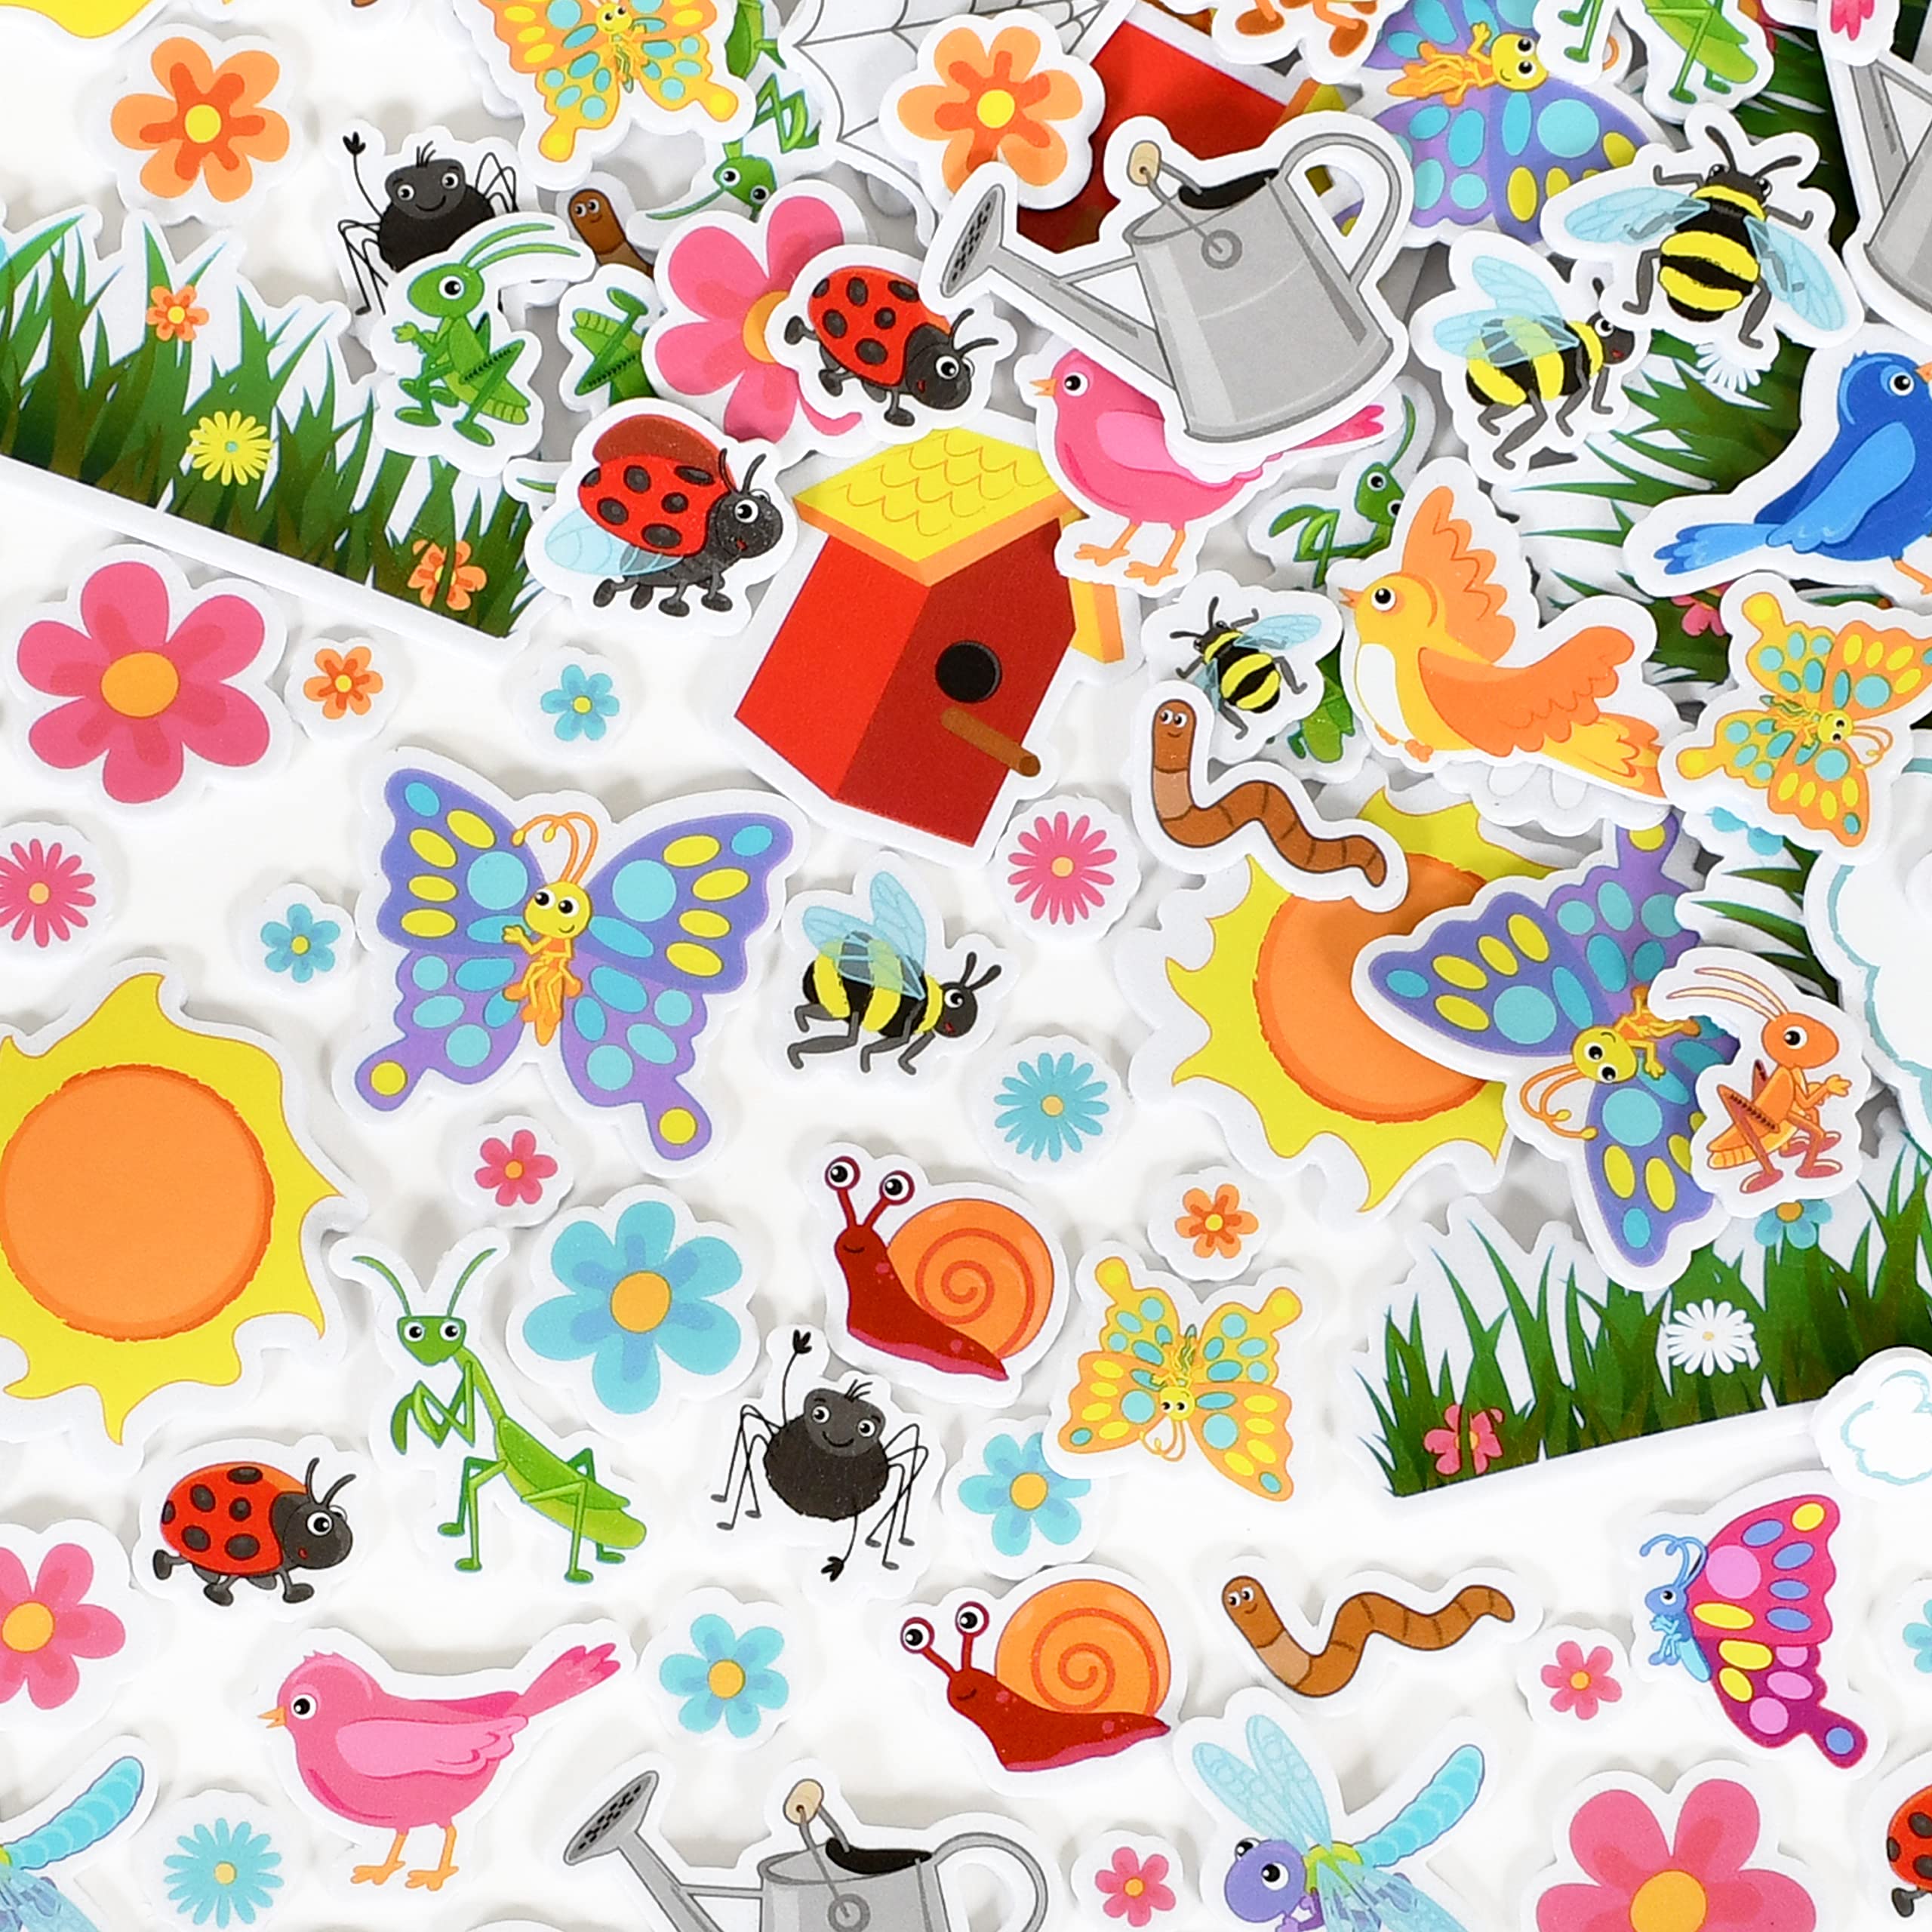 READY 2 LEARN Foam Stickers - Garden - Pack of 168 - Self-Adhesive Stickers for Kids - 3D Puffy Flower Stickers for Laptops, Party Favors and Crafts